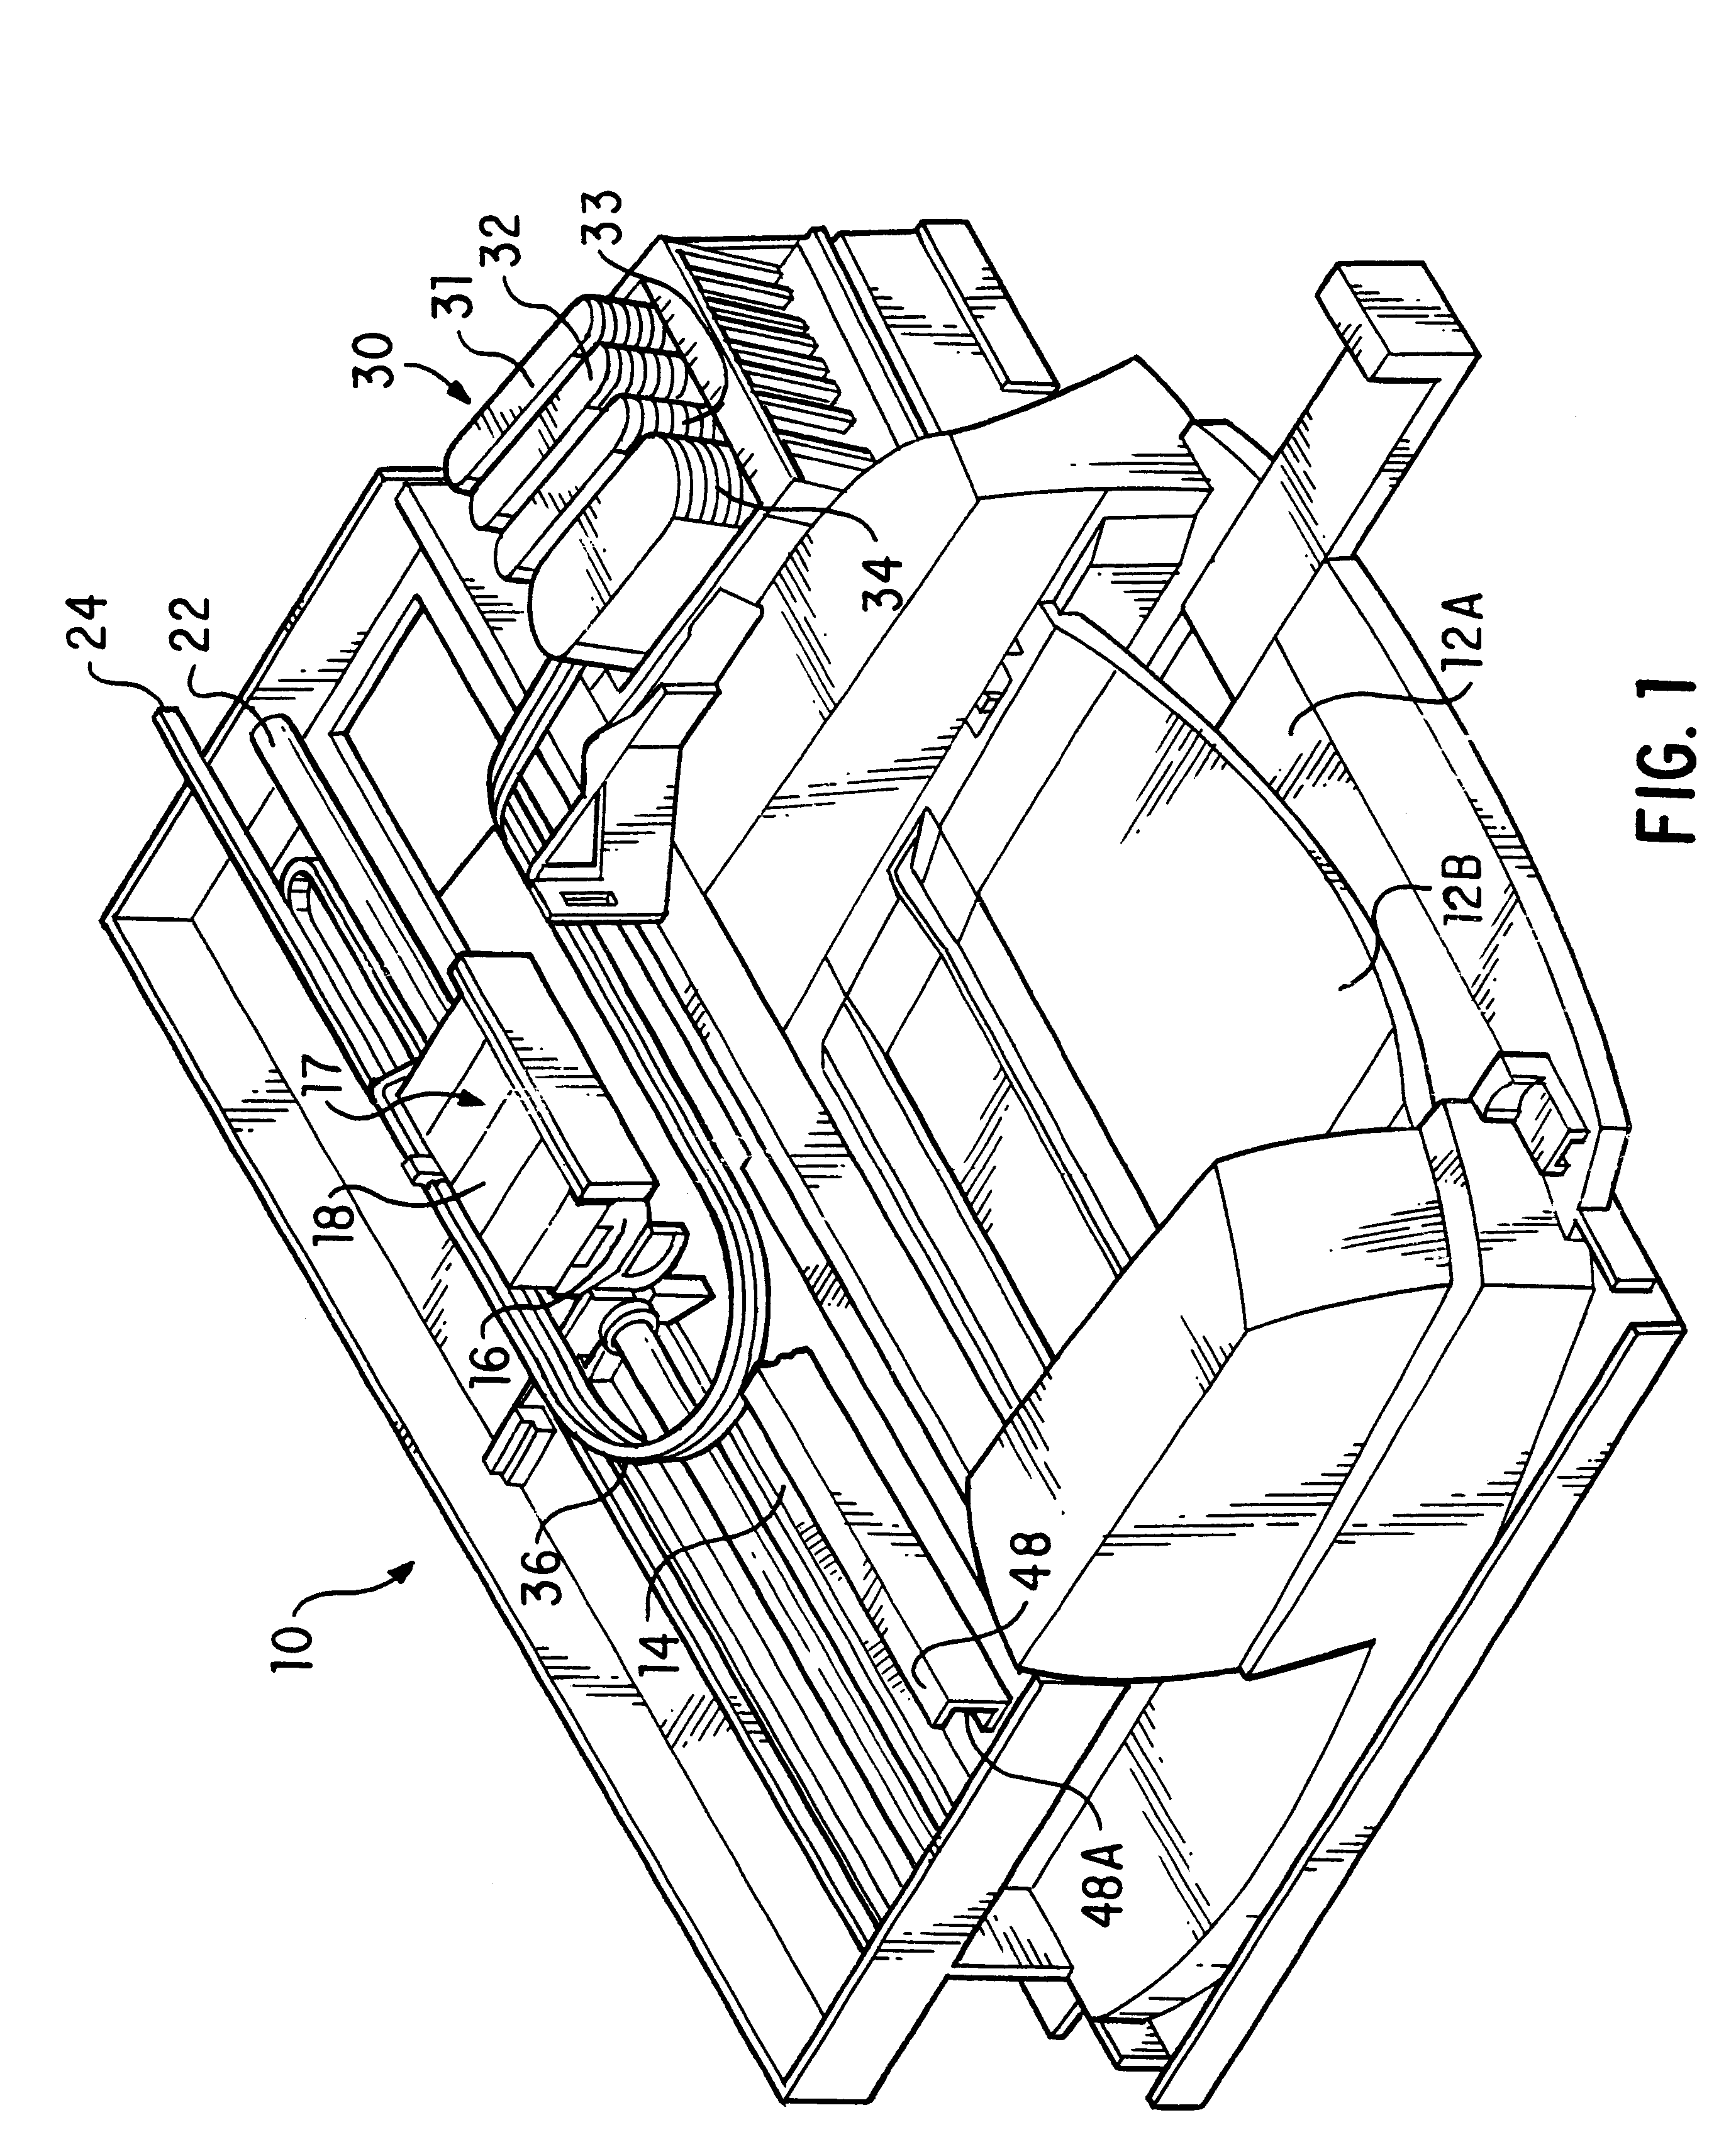 Apparatus for generating small volume, high velocity ink droplets in an inkjet printer